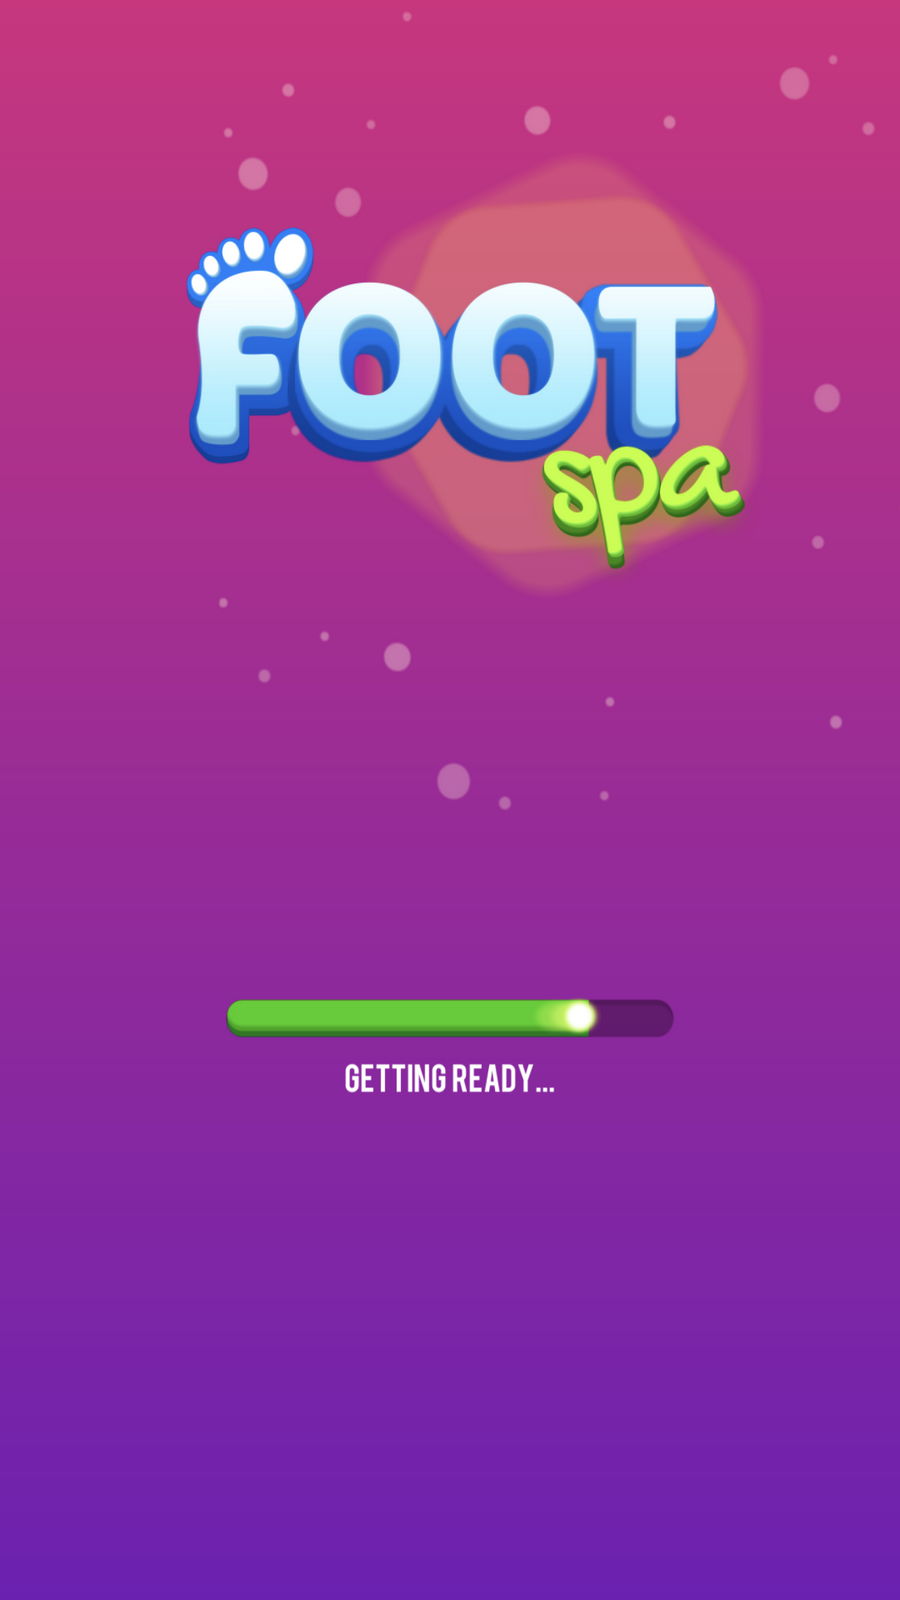 foot-spa-android-game-apk-com-thunderzone-pedicure-by-lion-studios